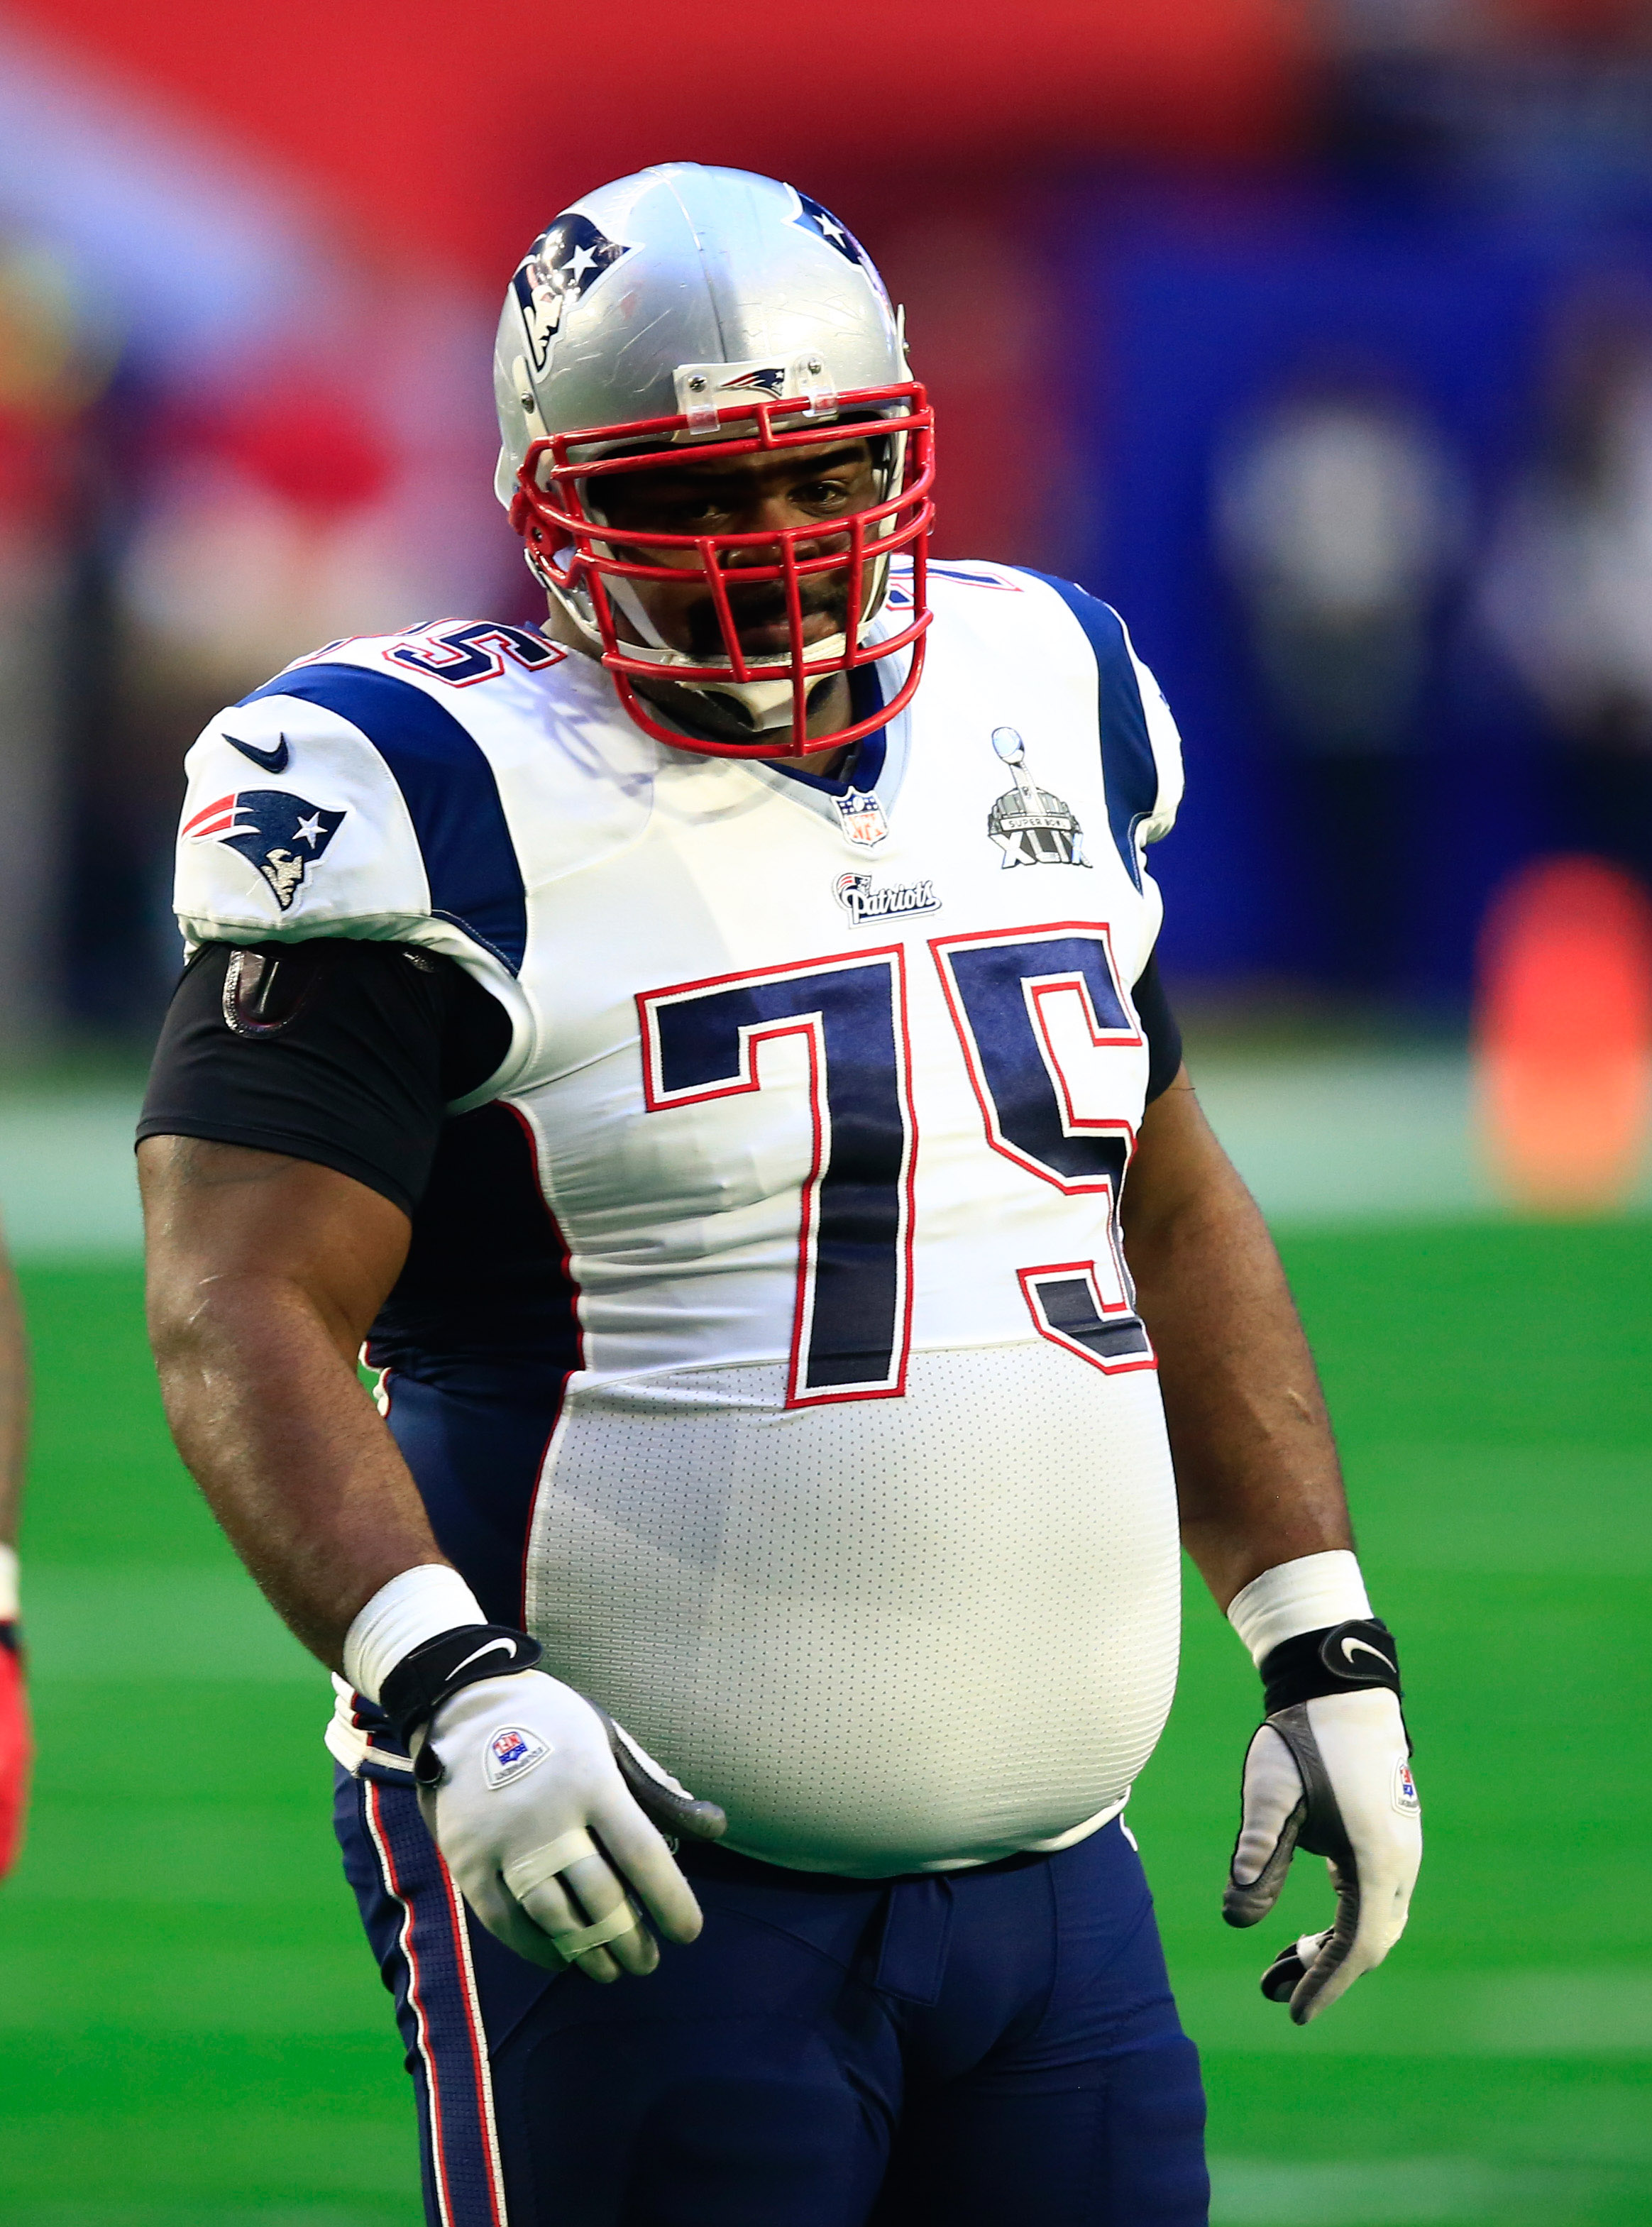 The story of Vince Wilfork's football career : r/Patriots